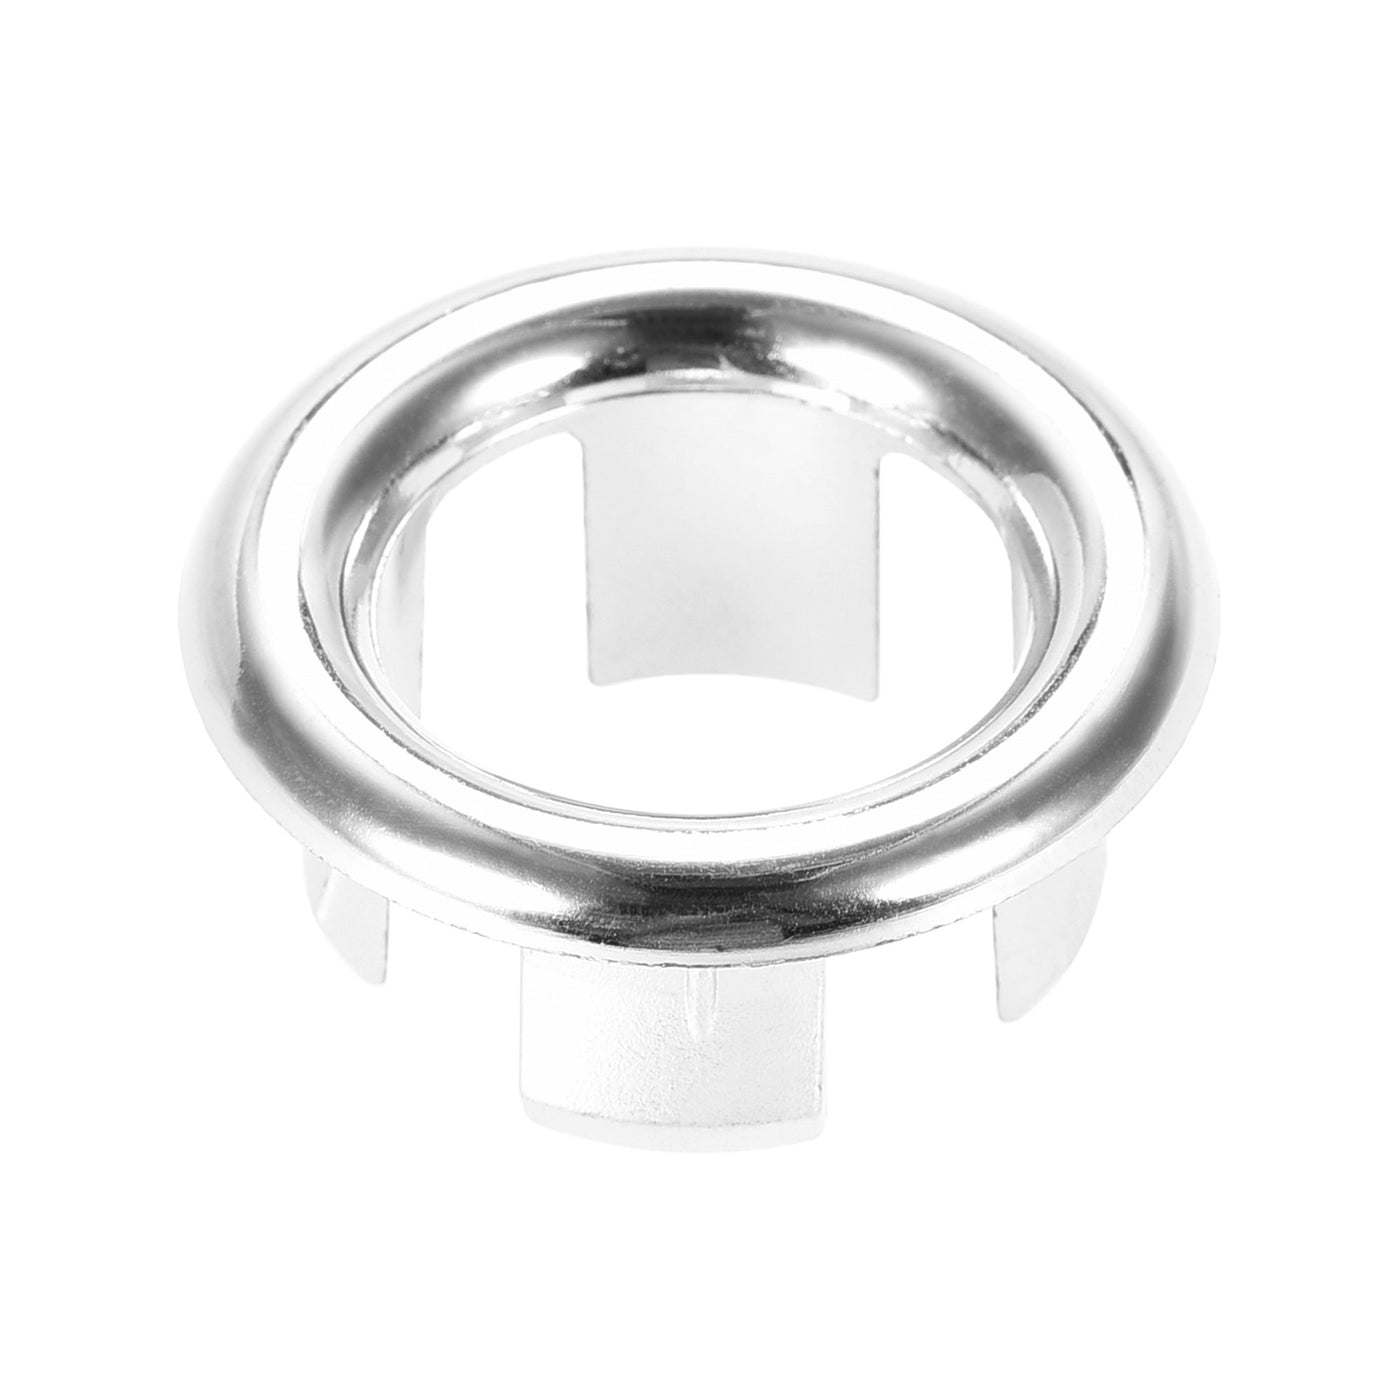 uxcell Uxcell Sink Basin Trim Overflow Cover Insert in Hole Ring Covers Caps Silver Tone 24pcs